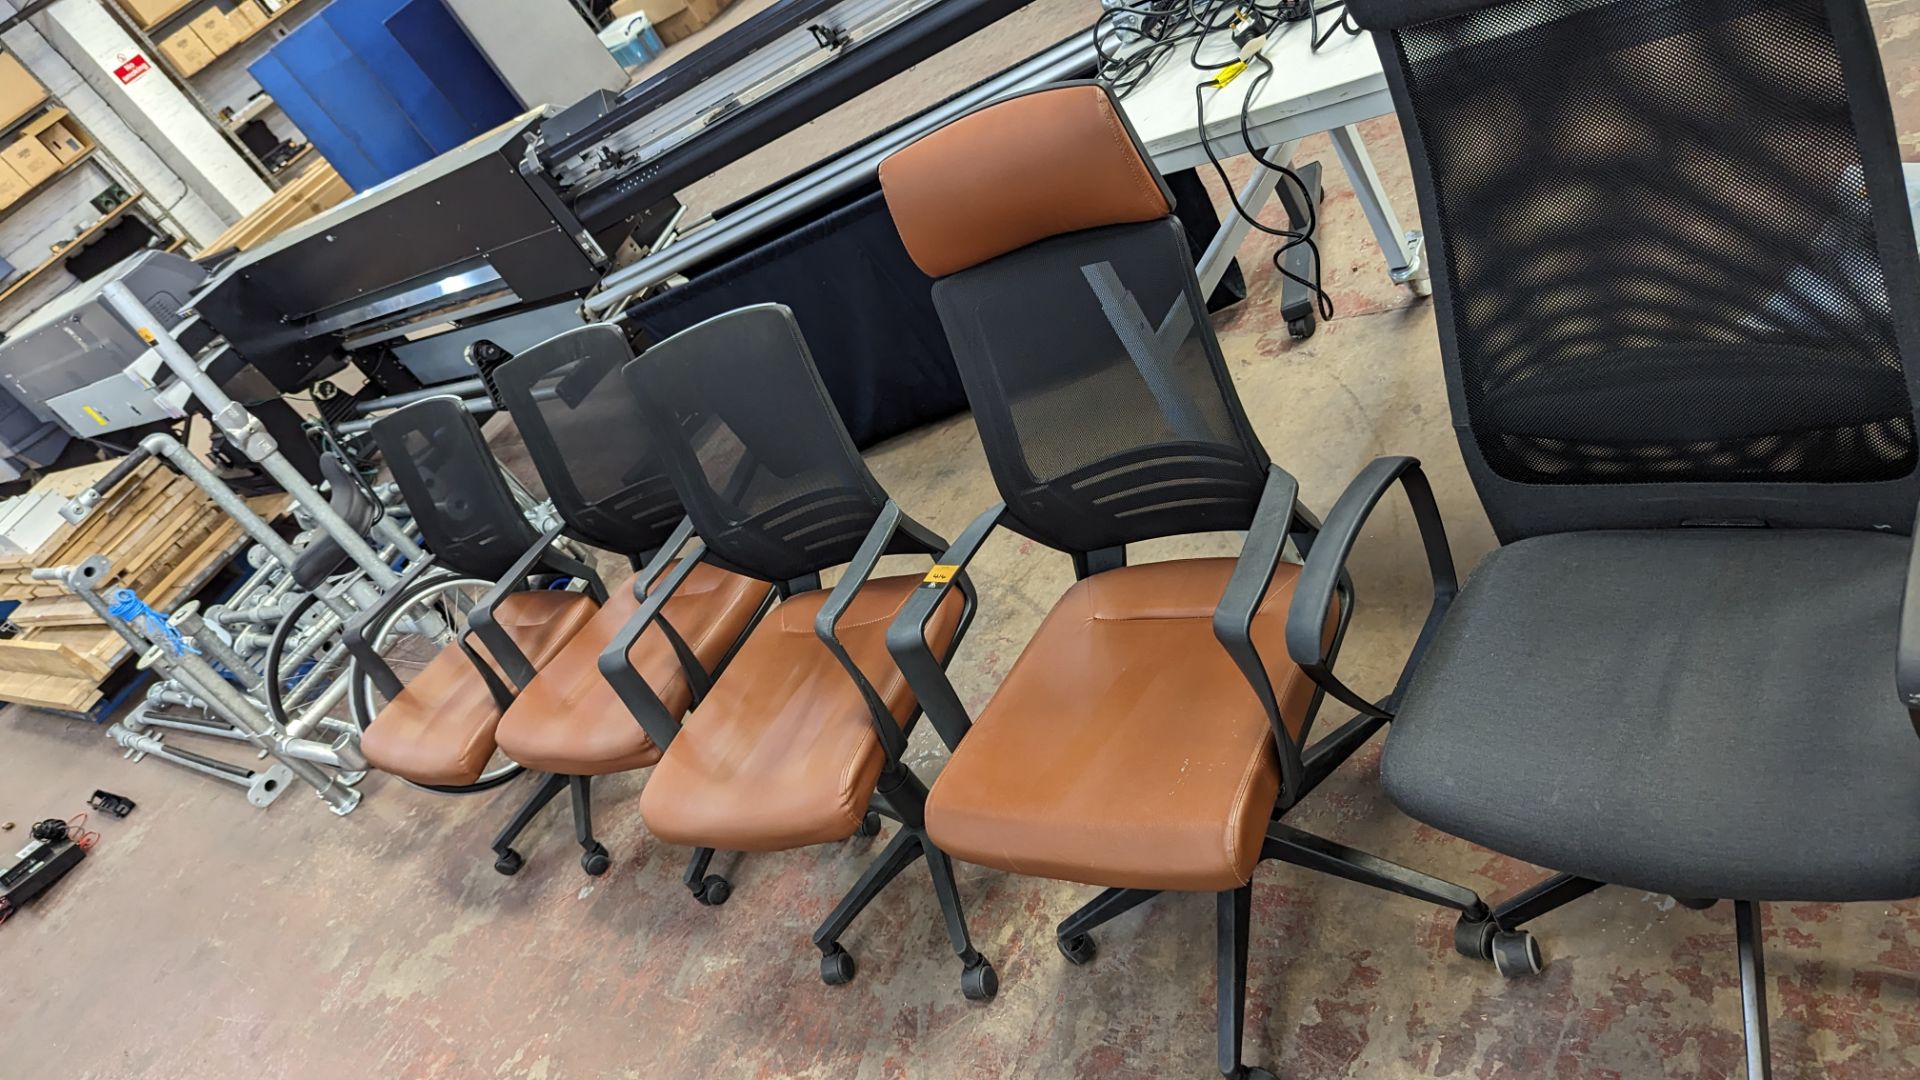 4 off matching modern mesh back chairs with brown leather/leather look seat bases, one of which has - Image 4 of 10